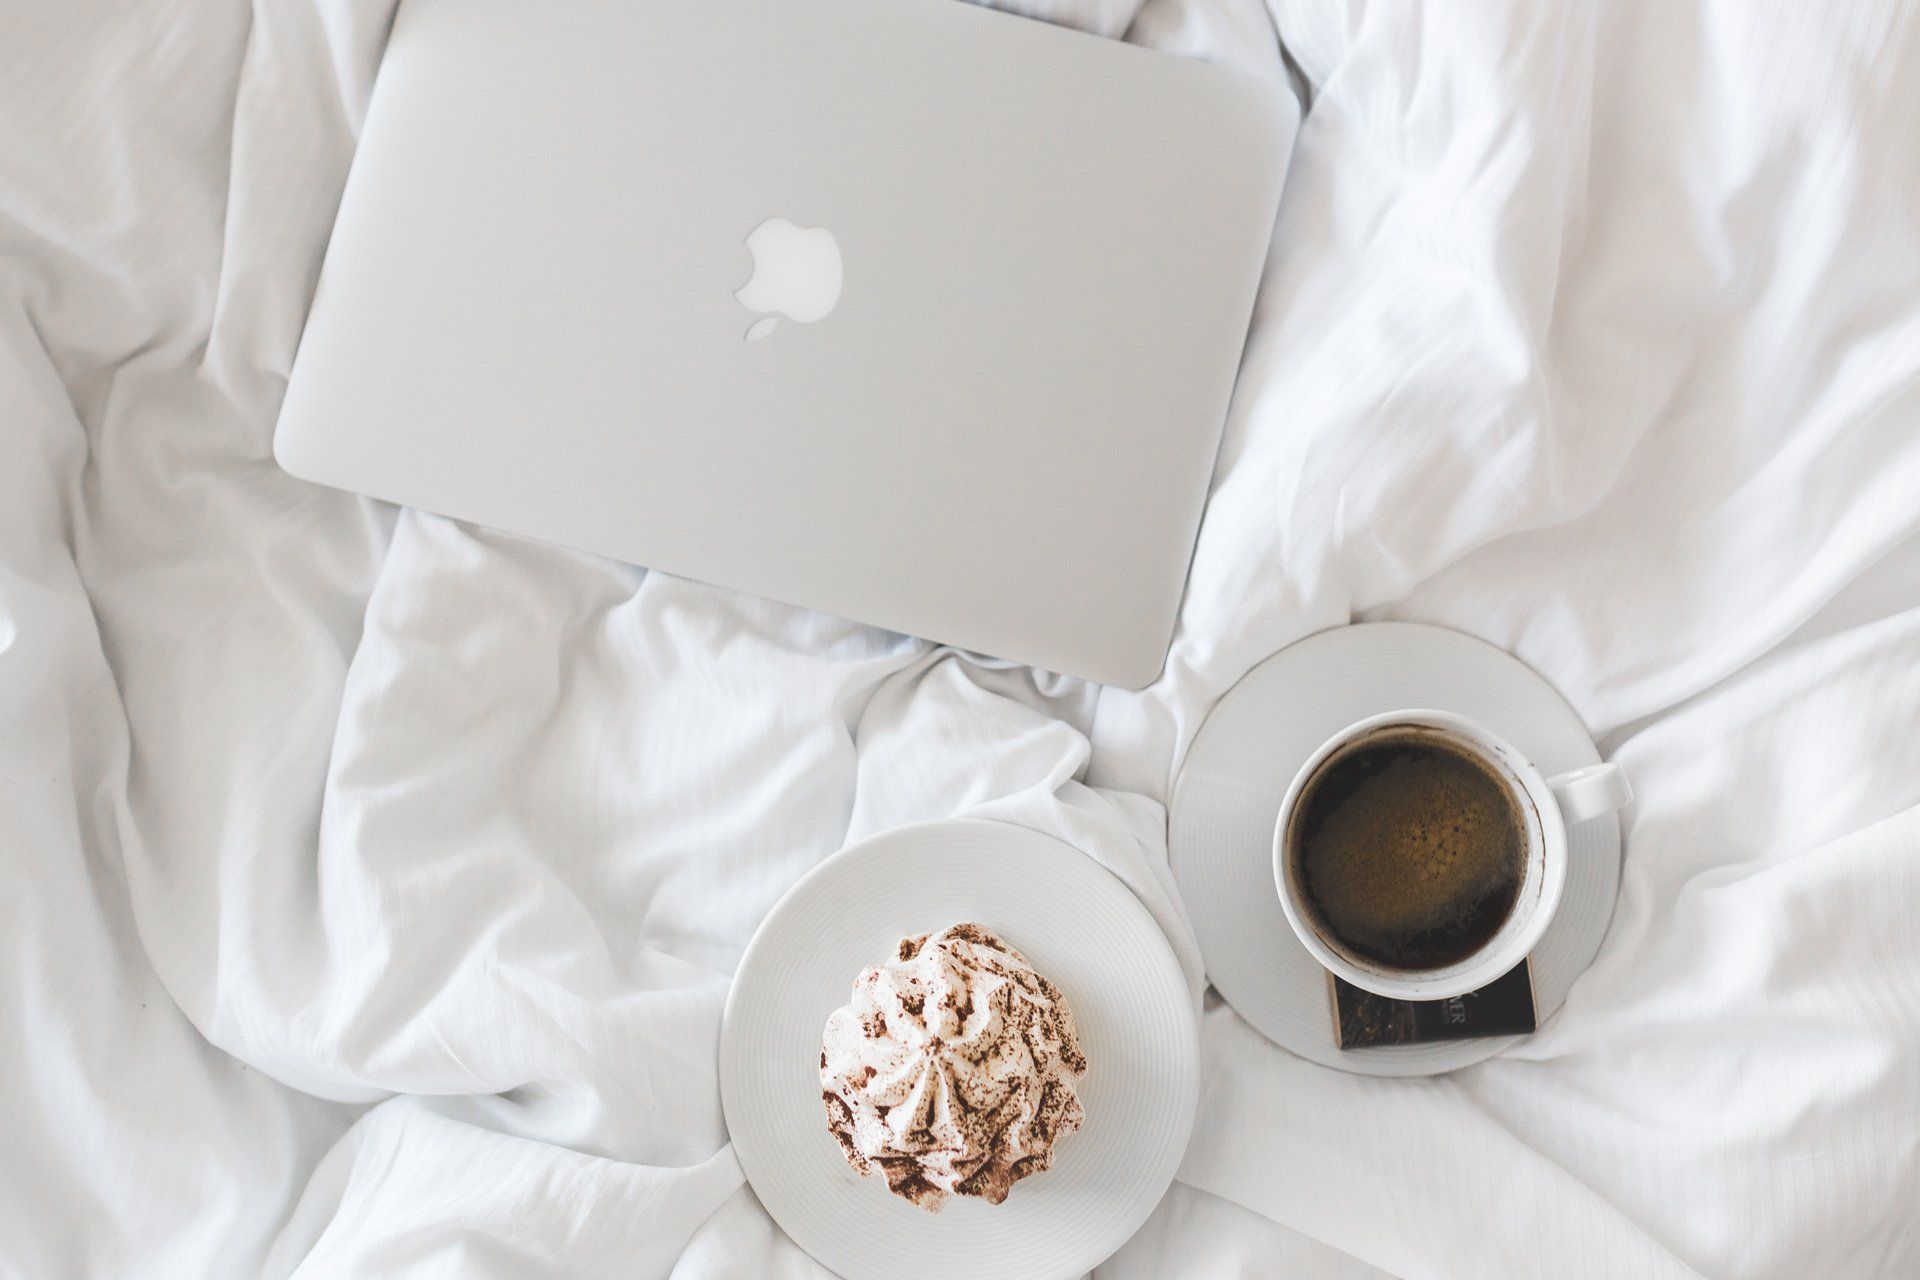 coffee dessert and laptop on bed duvet